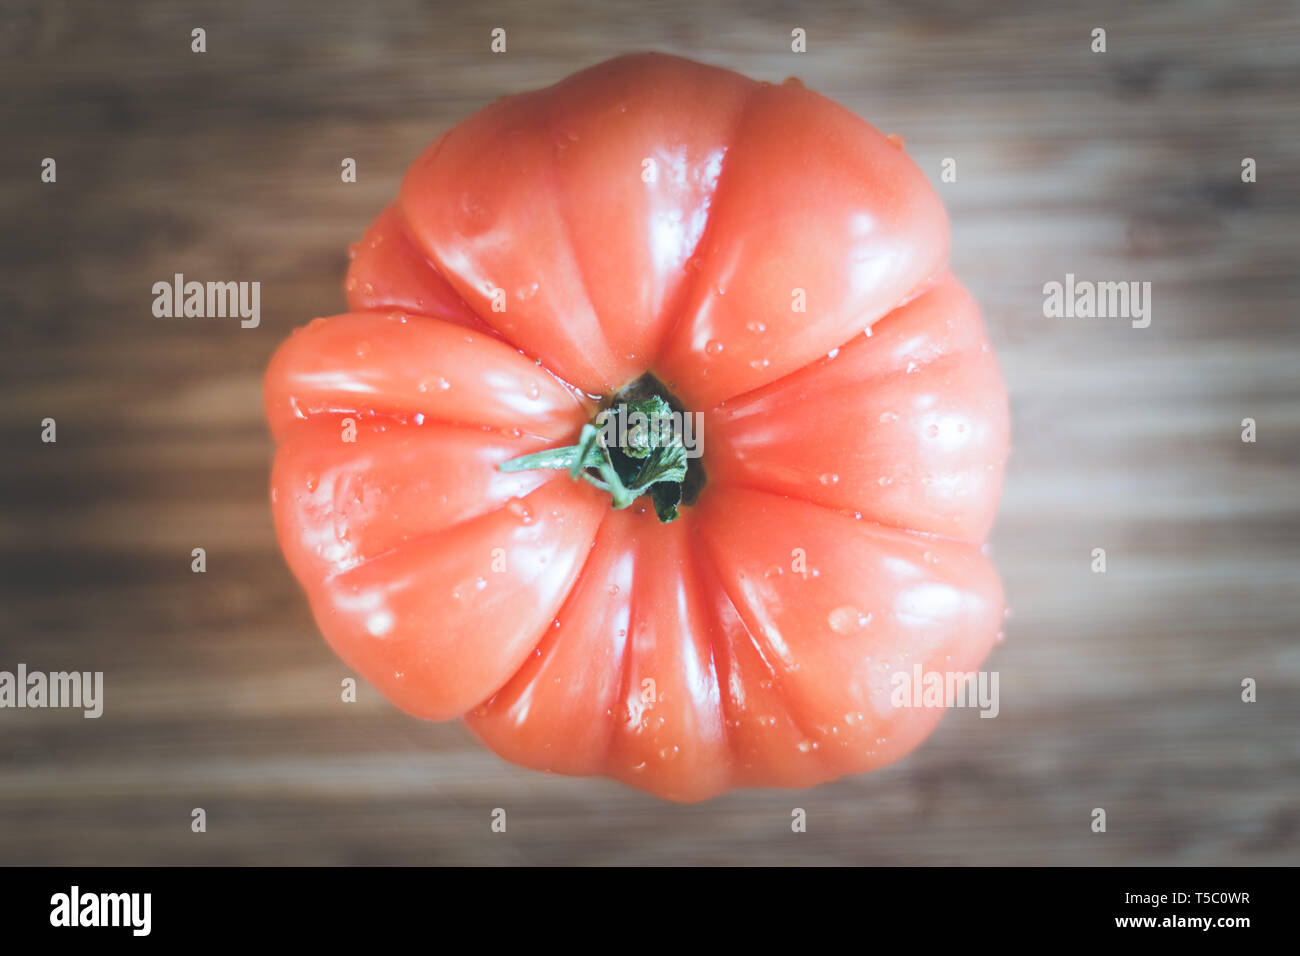 Close up picture of oxheart tomato on a bamboo wood plate. Stock Photo